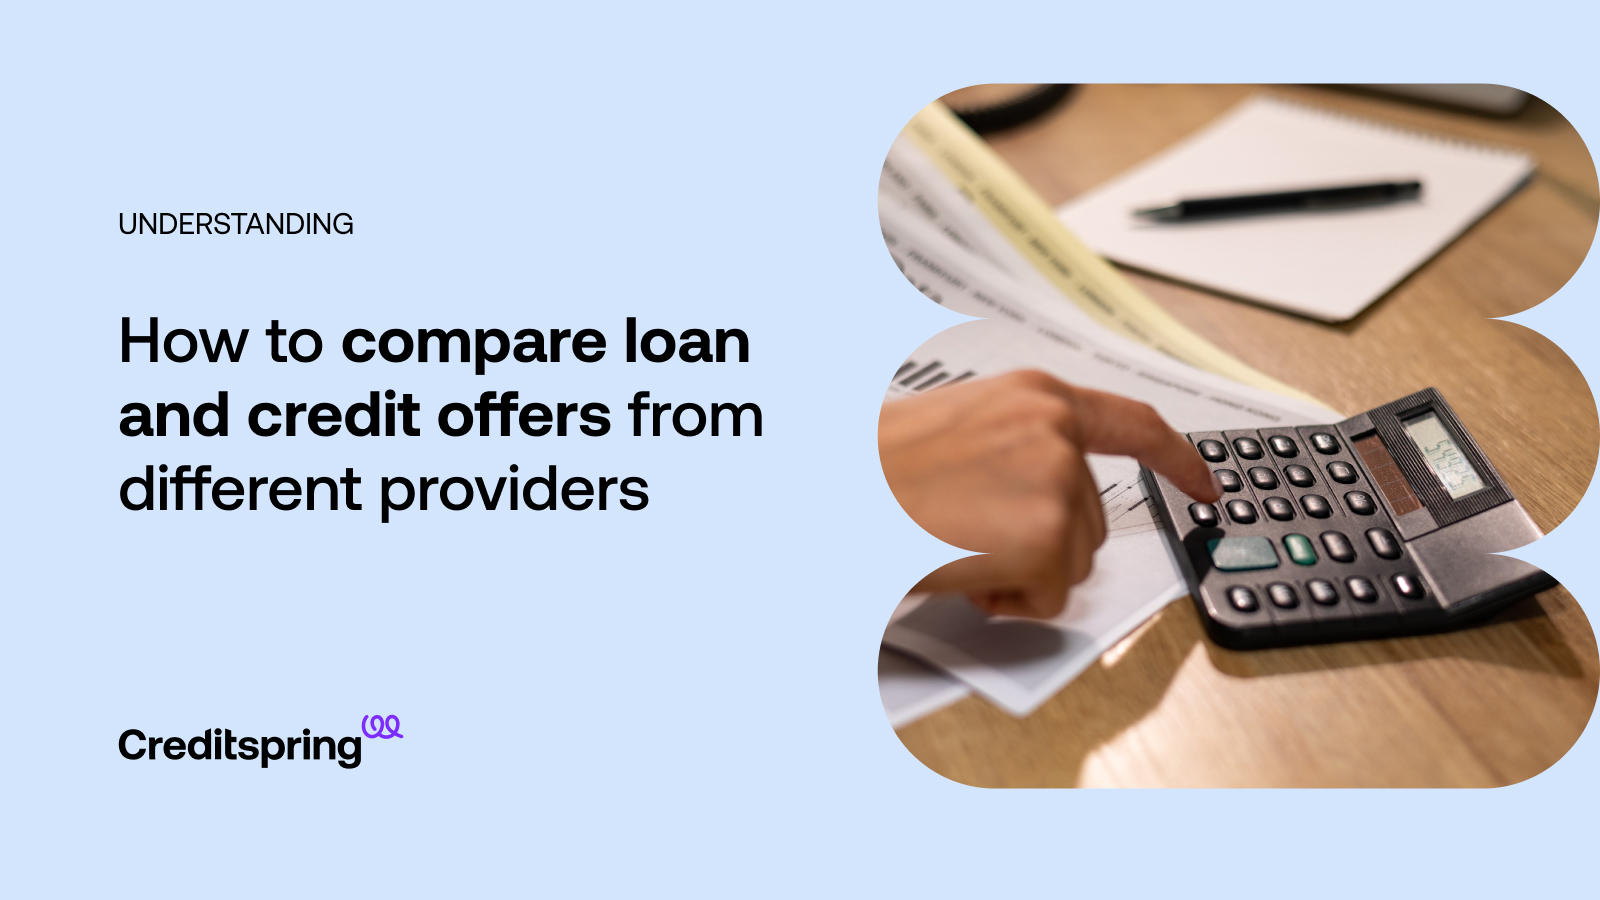 how to compare loan and credit offers from different providers